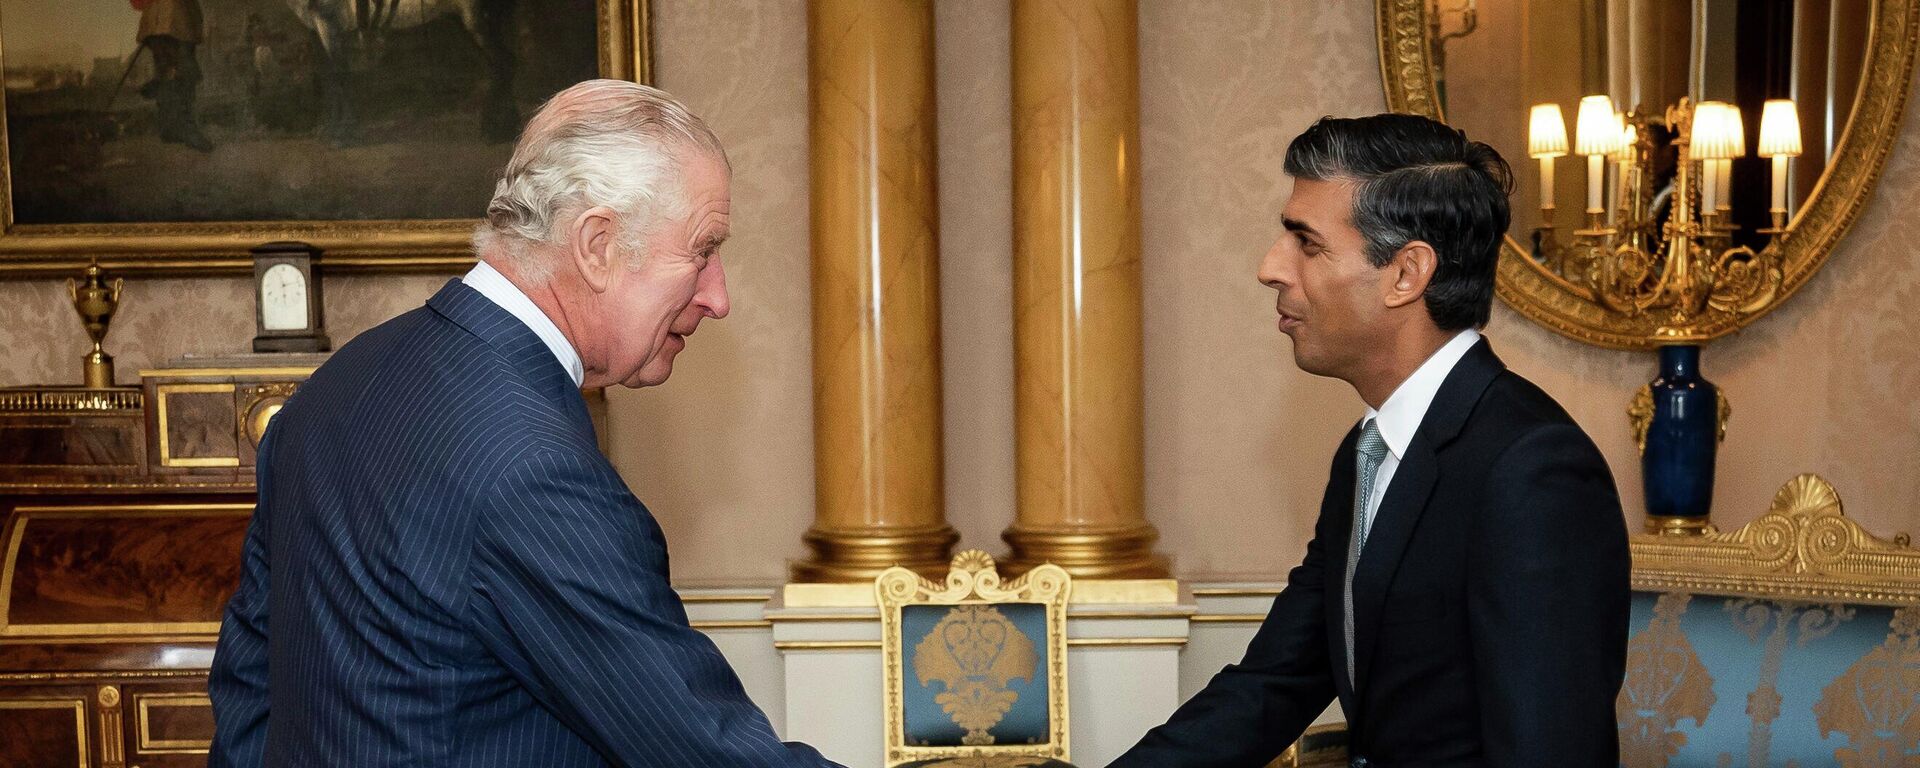 King Charles III welcomes Rishi Sunak during an audience at Buckingham Palace, London, where he invited the newly elected leader of the Conservative Party to become Prime Minister and form a new government, Tuesday, Oct. 25, 2022.  - Sputnik International, 1920, 25.10.2022